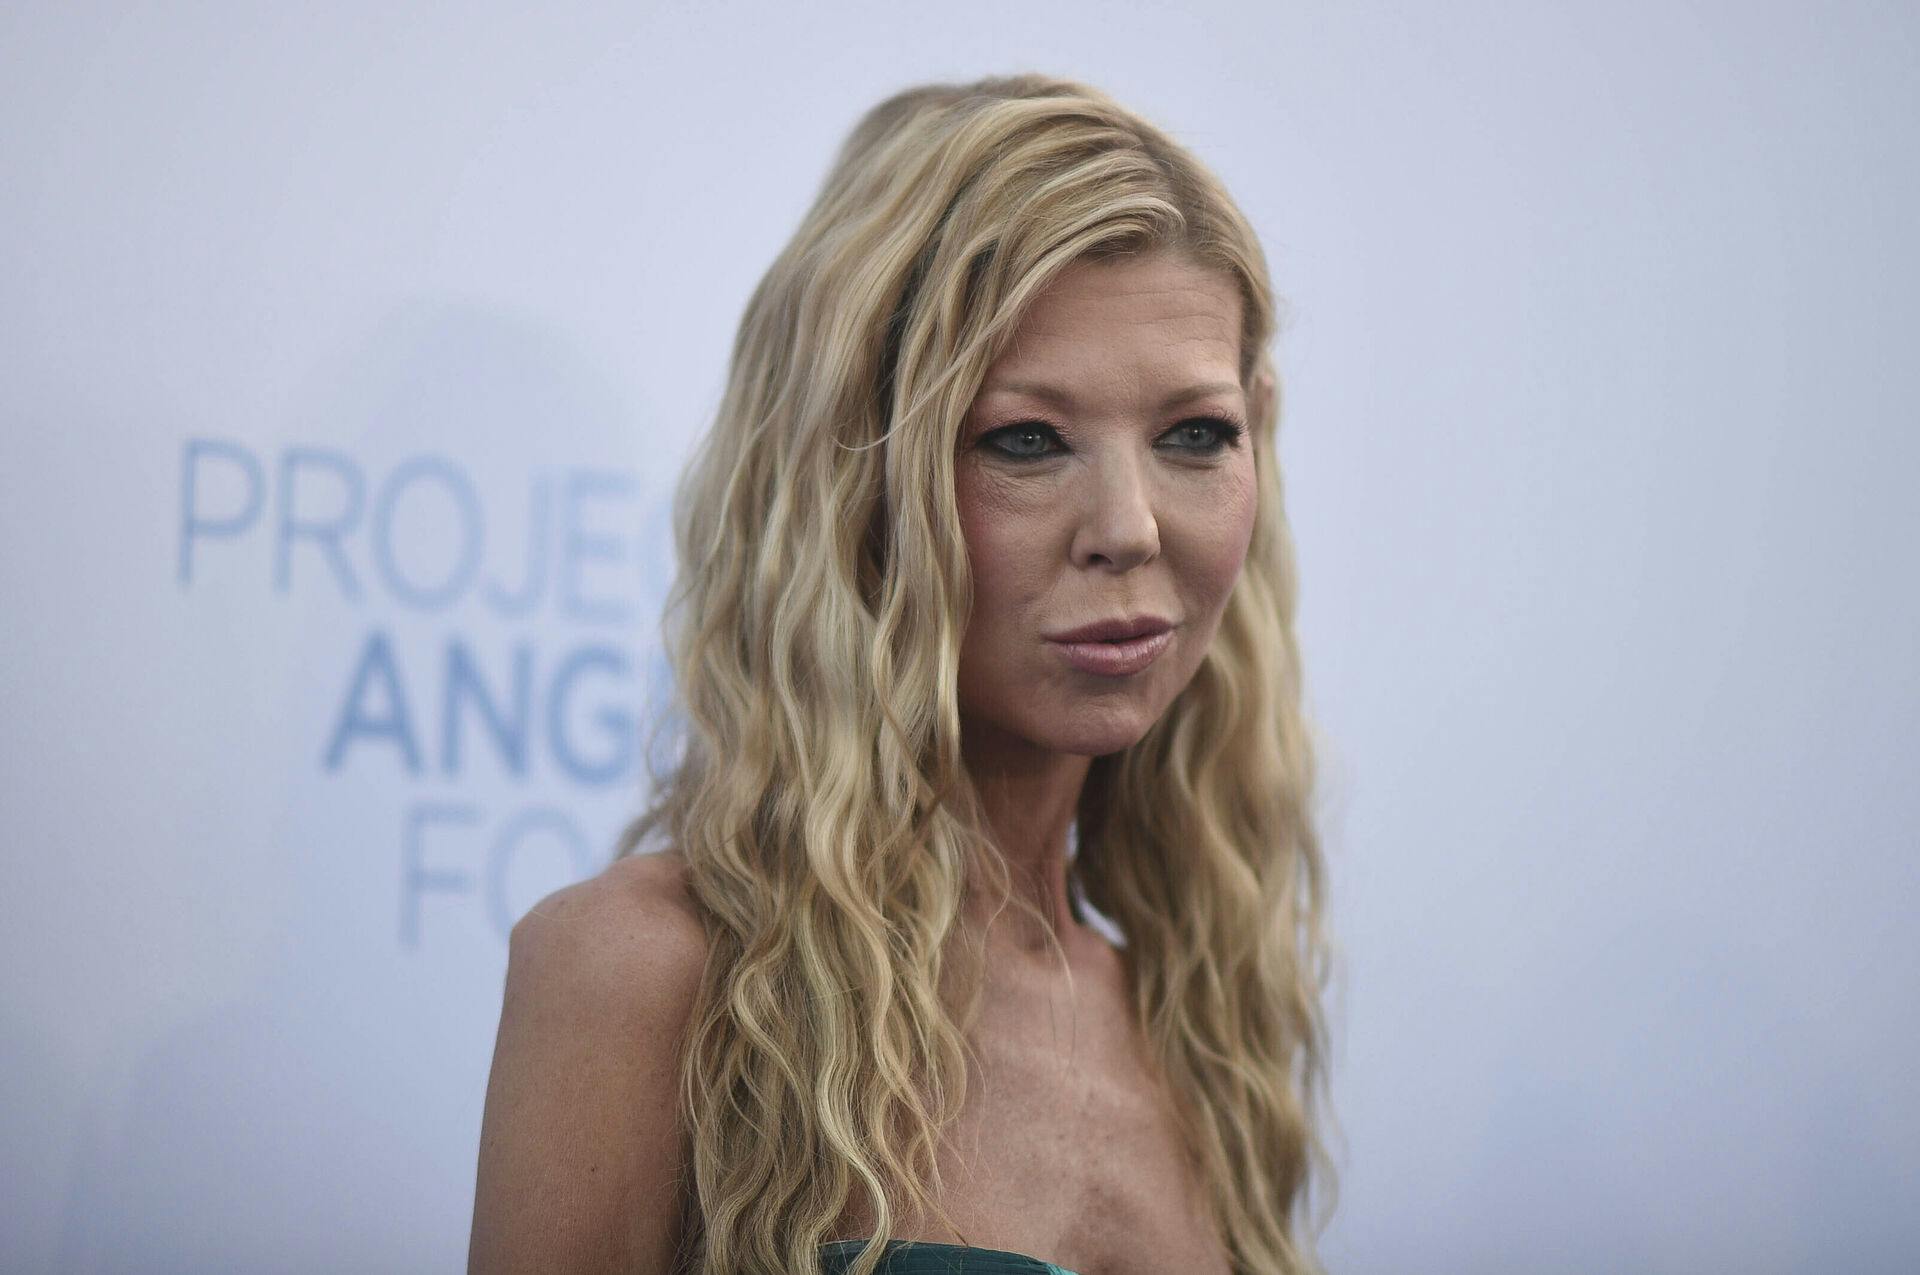 Tara Reid arrives at the Project Angel Food Angel Awards on Saturday, Sept. 23, 2023, in Los Angeles. (Photo by Richard Shotwell/Invision/AP)